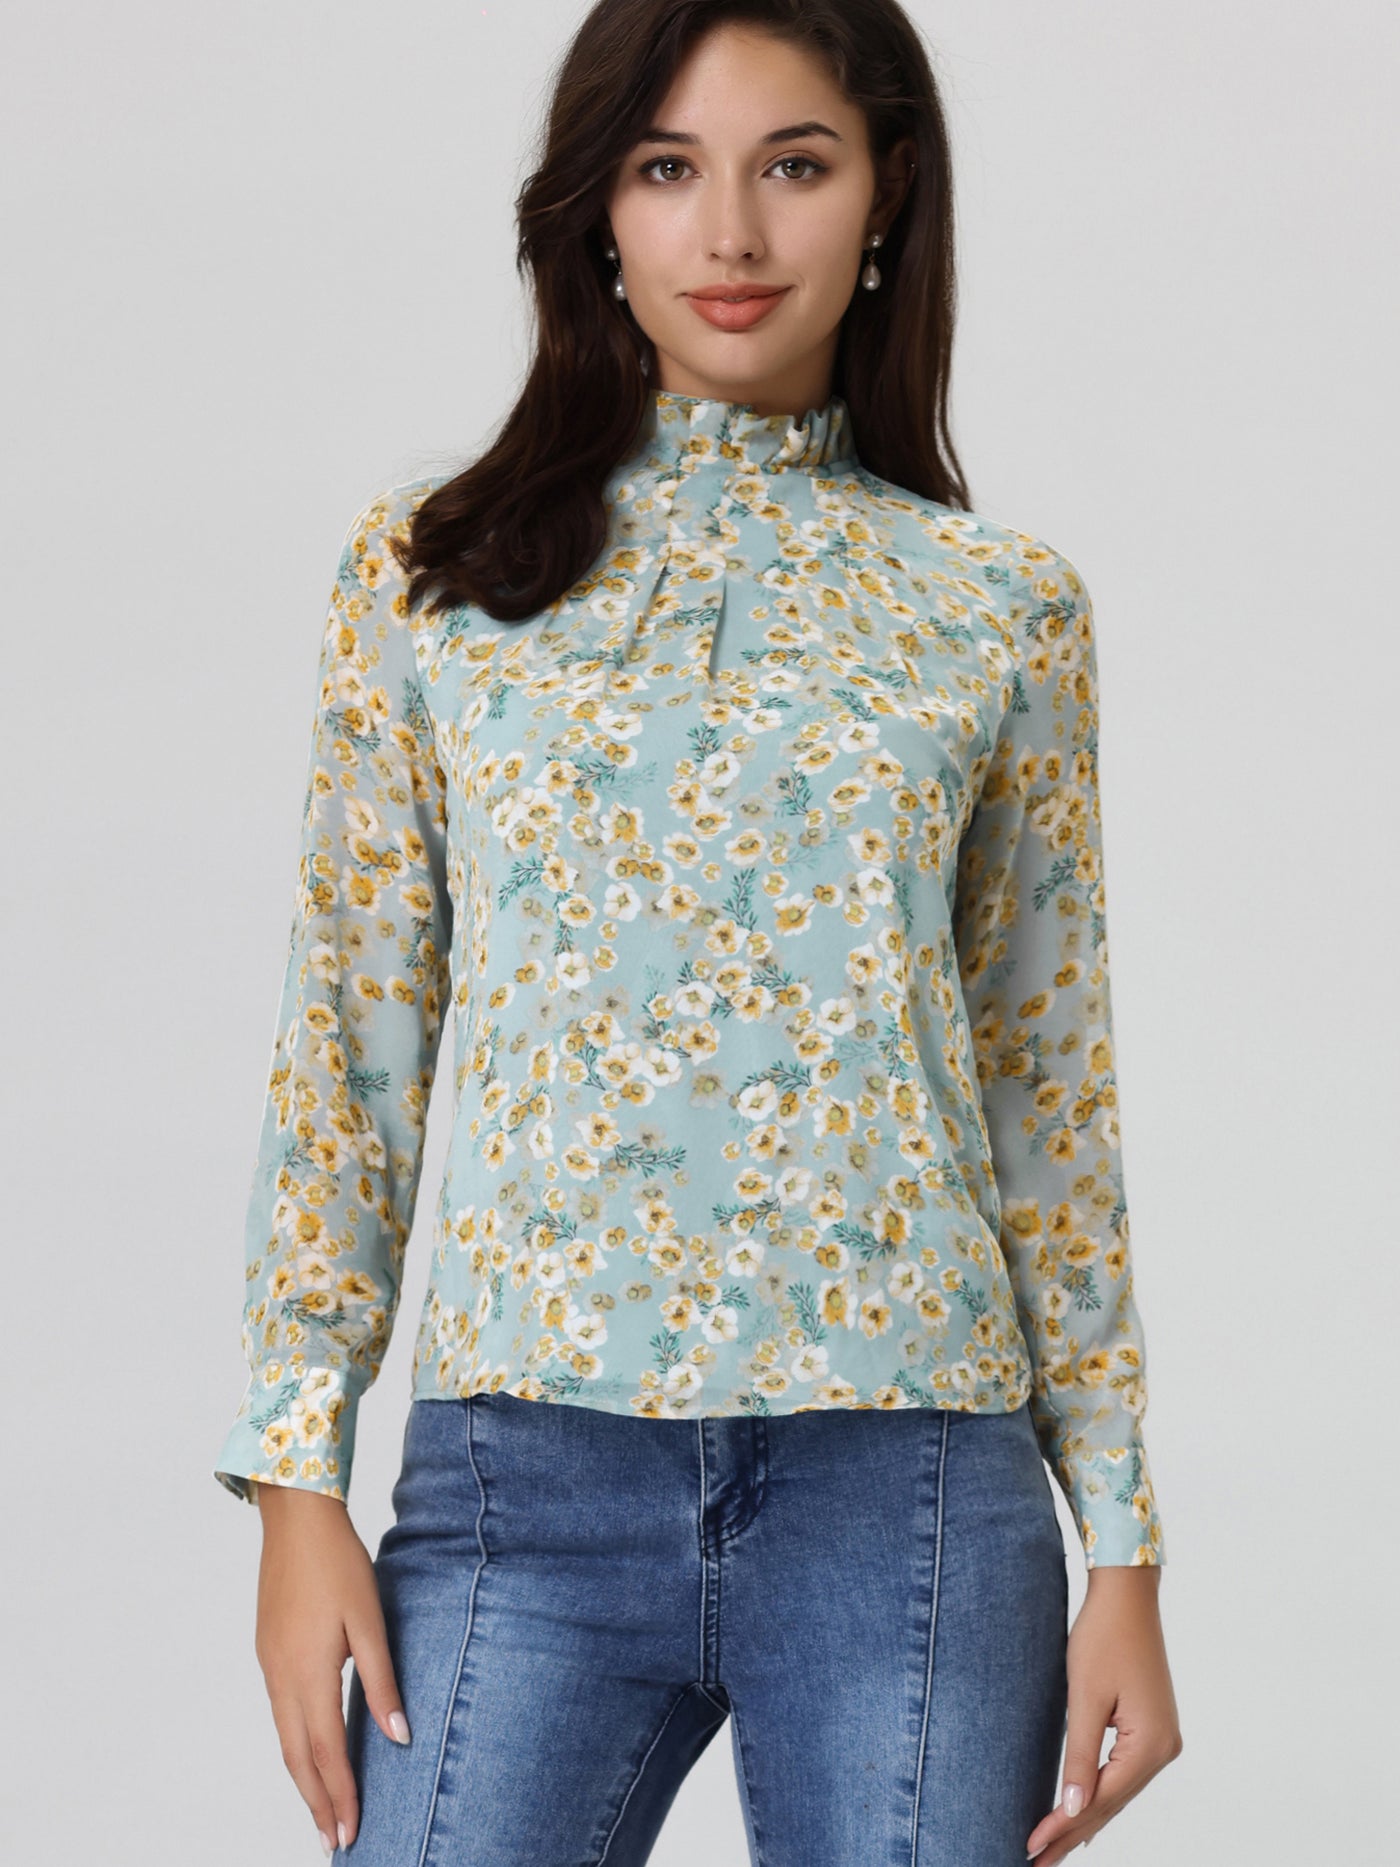 Bublédon Women's Floral Shirt Pleated Ruffled Stand Collar Blouse